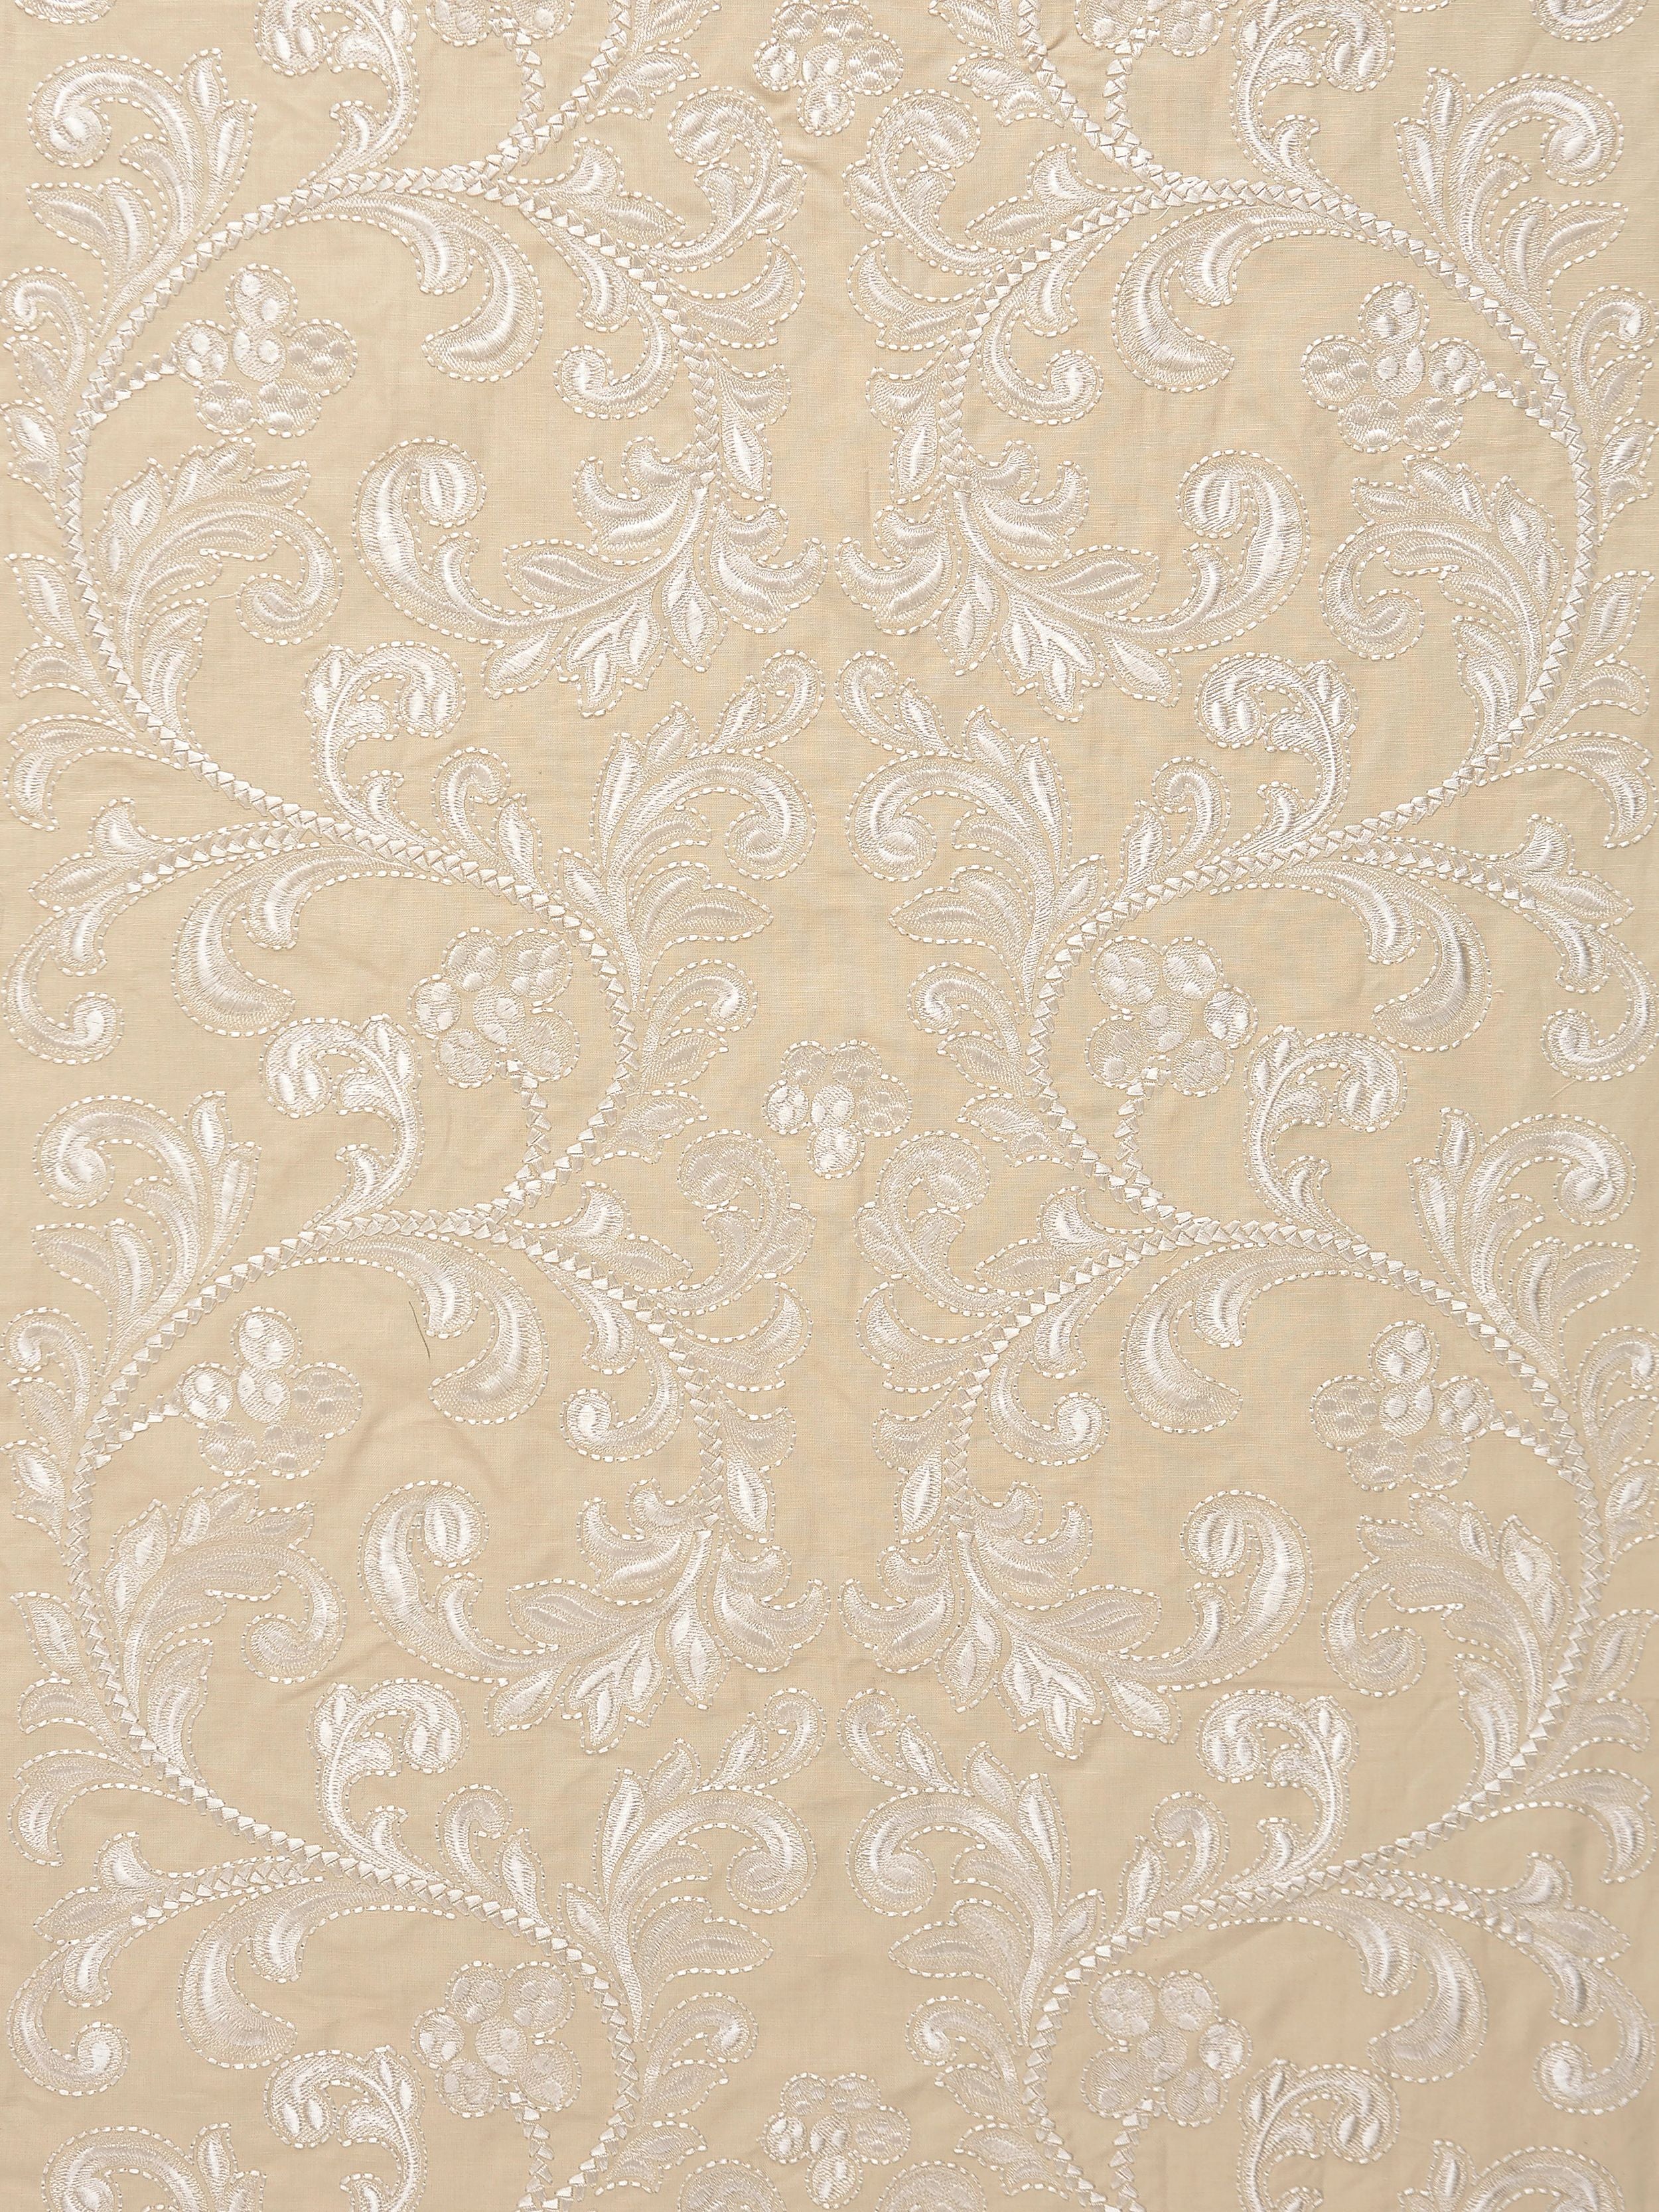 Chiara Embroidery fabric in chardonnay color - pattern number SC 000127029 - by Scalamandre in the Scalamandre Fabrics Book 1 collection